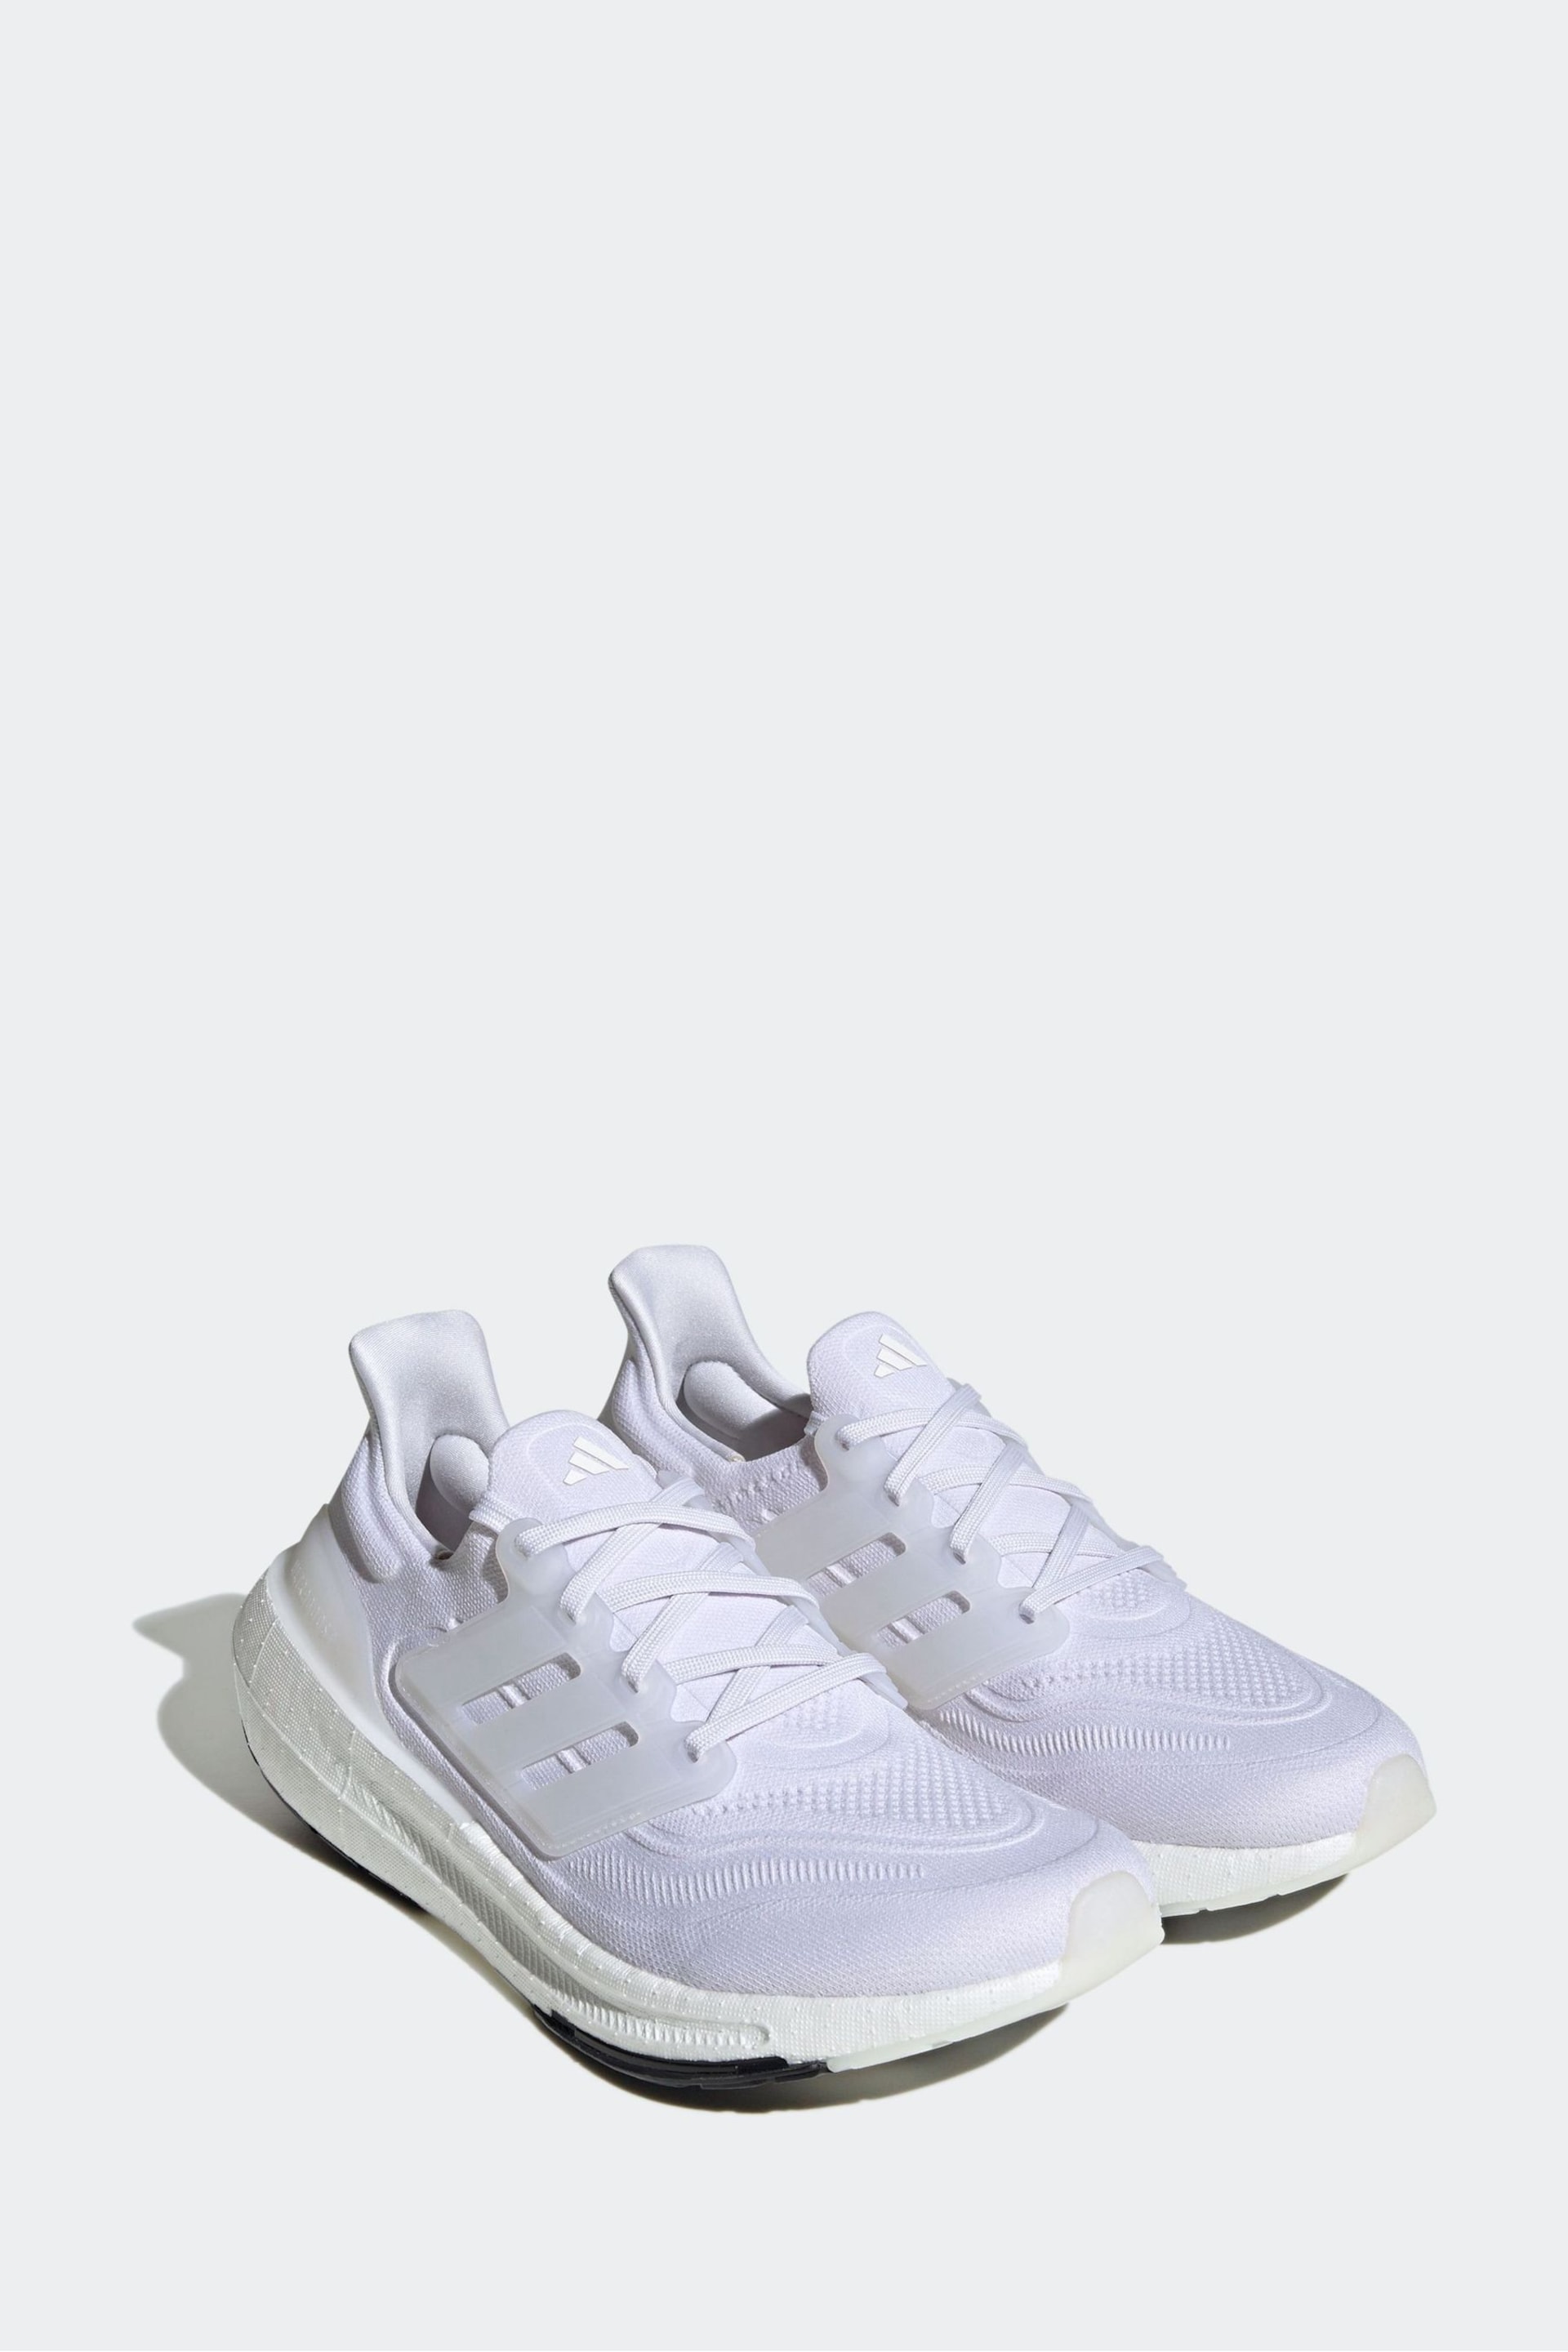 adidas White Ultraboost Light Trainers - Image 4 of 12